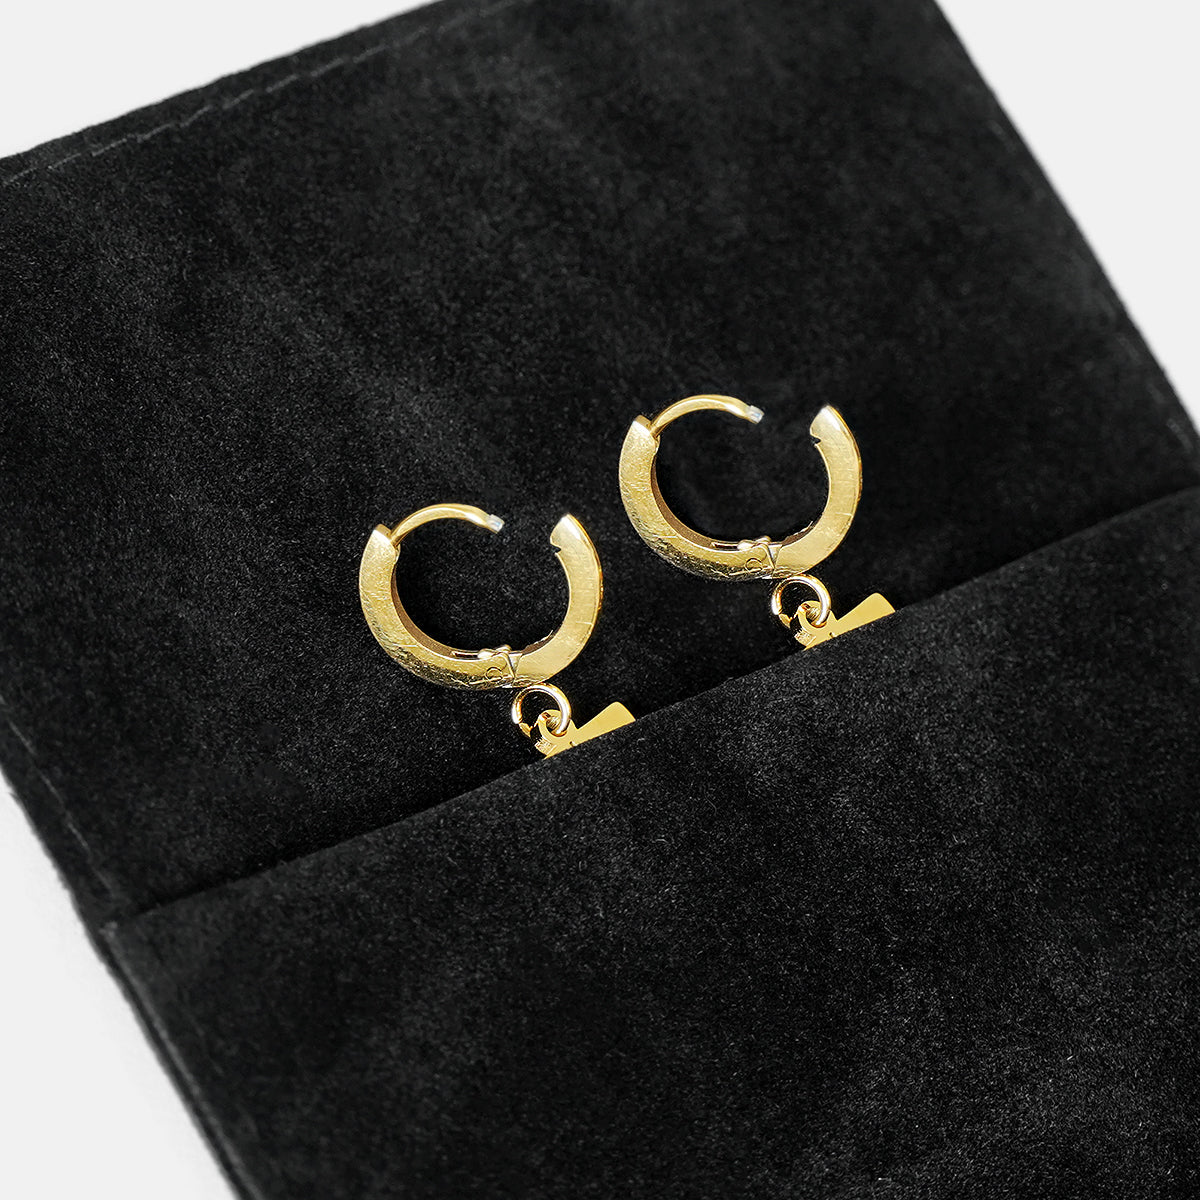 16 Number Earring - Gold Plated Stainless Steel